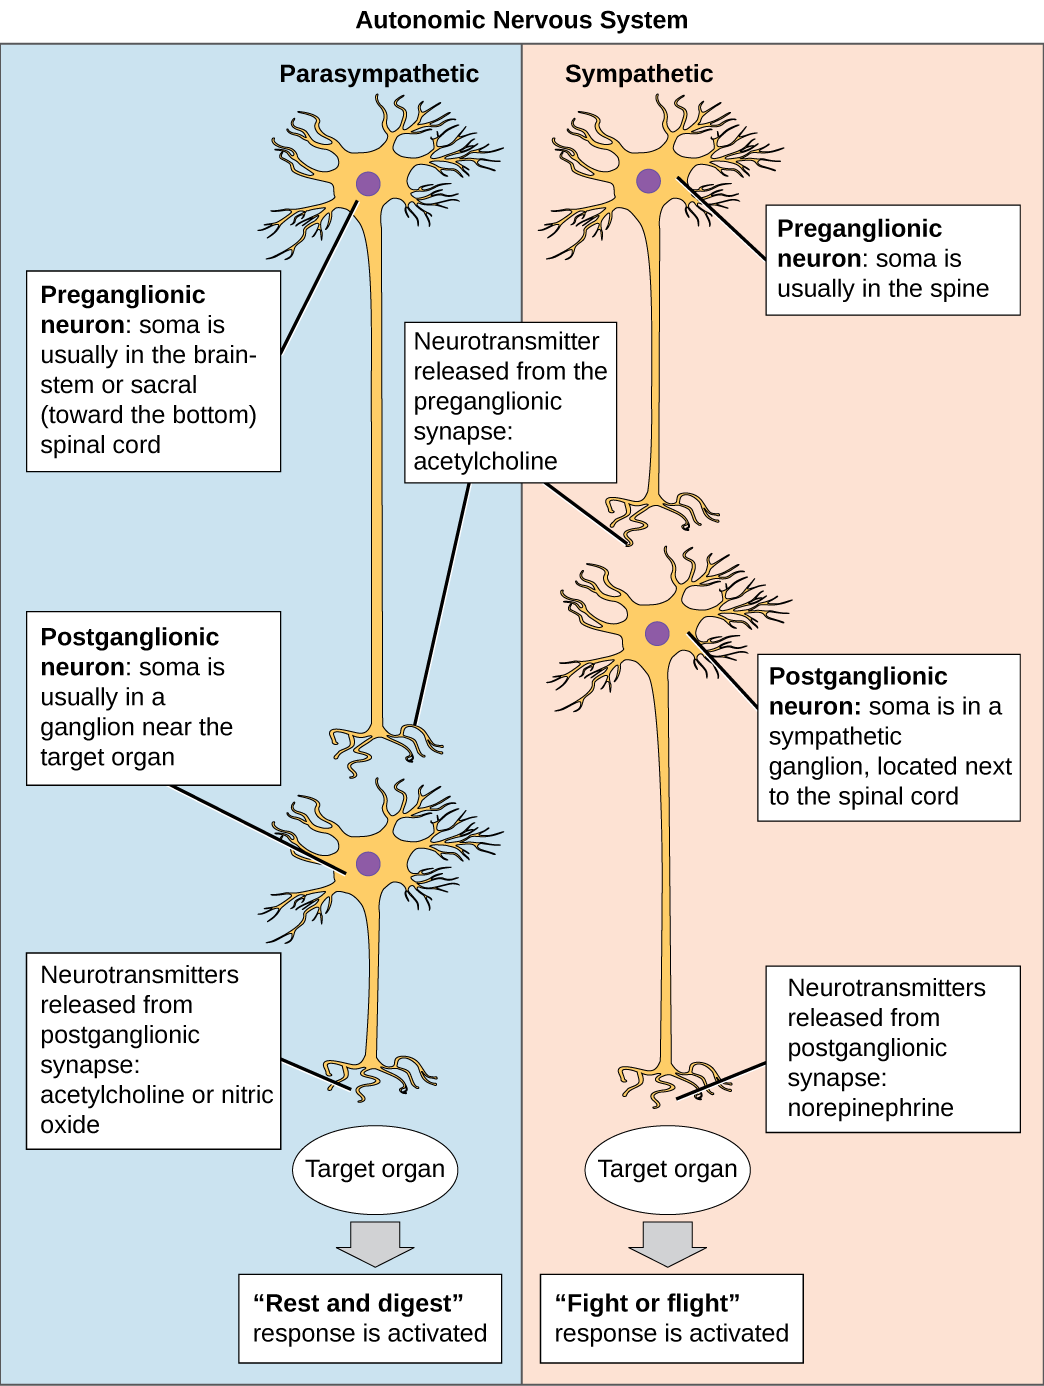 The Autonomic System neurons conduct signals via the preganglionic neurons to postganglionic neurons to the target organs.